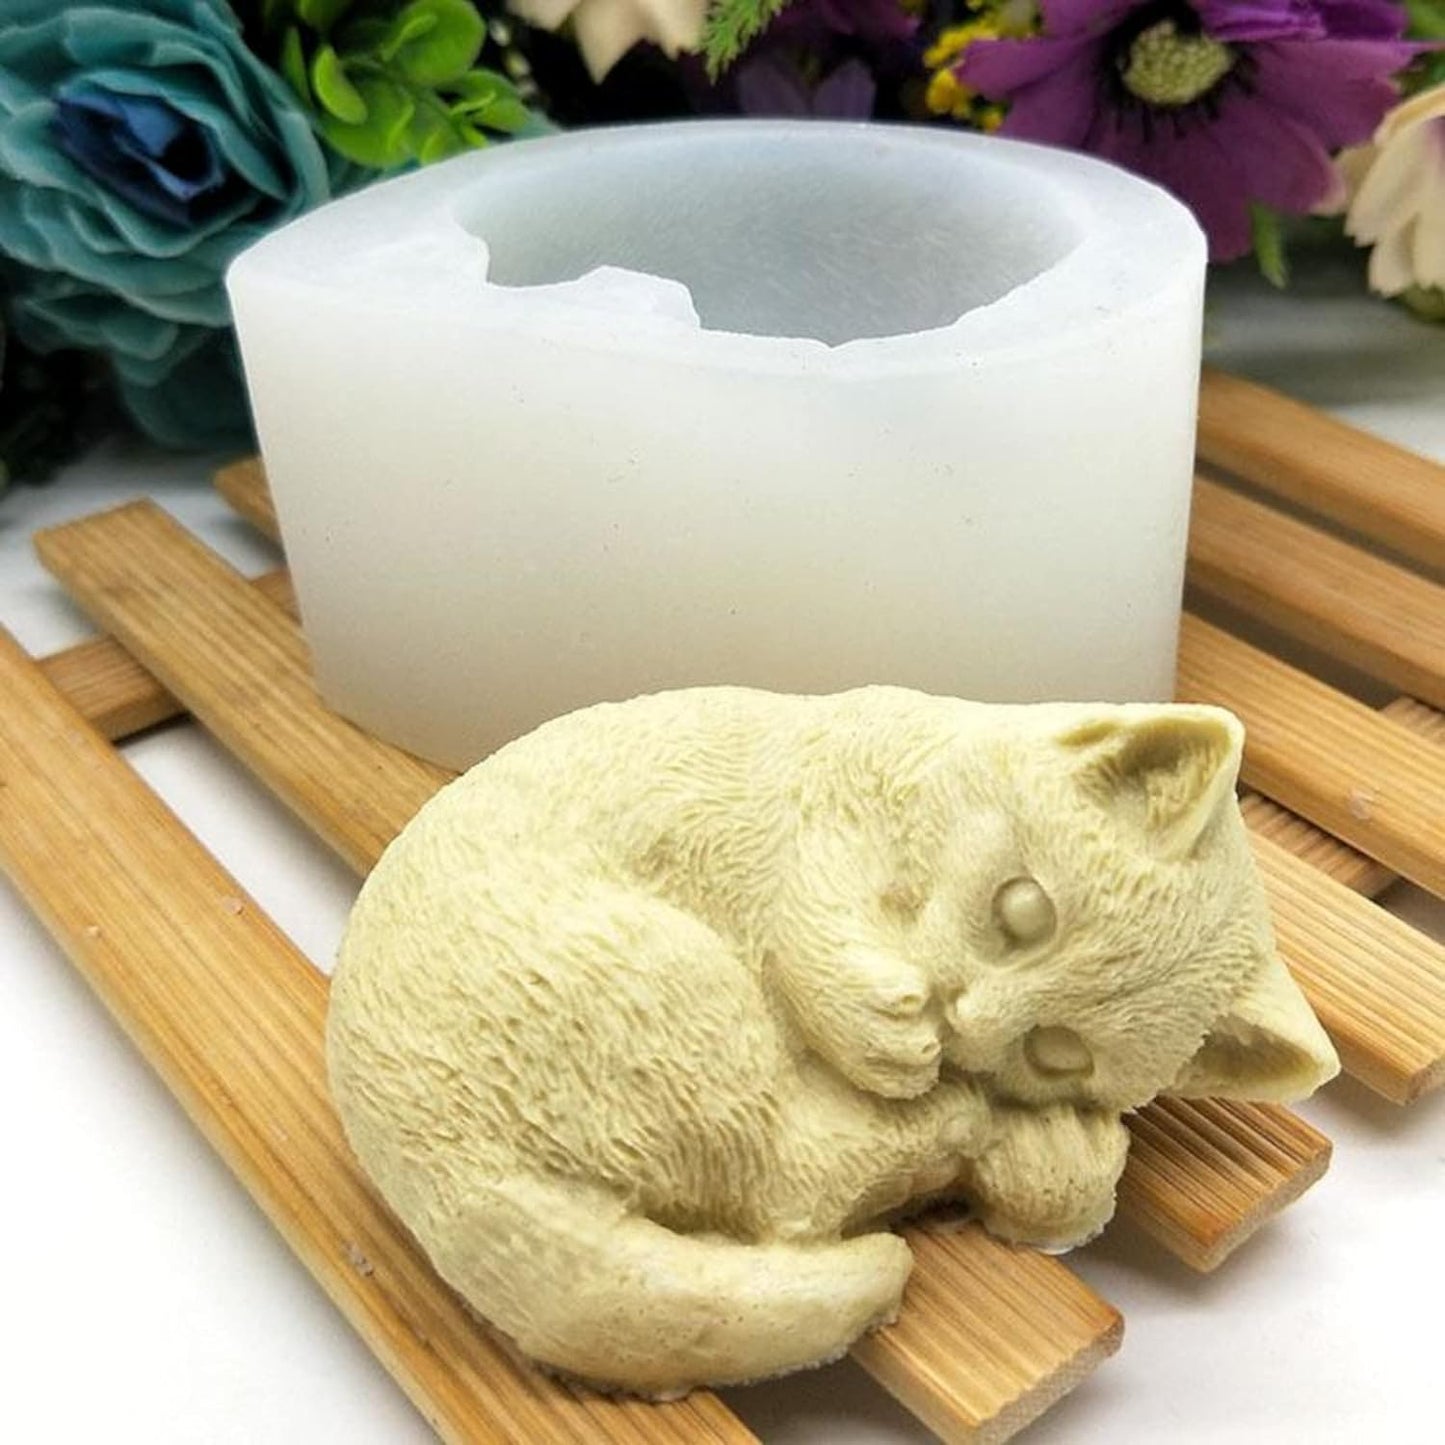 34 Pcs Succulent Candle Mold Succulent Mold Succulent Resin Mold Clay Mold Jewelry Resin Casting Mold Candle Making Molds Craft Supplies 3D Mold Silicone Mold for Resin Casting Mold